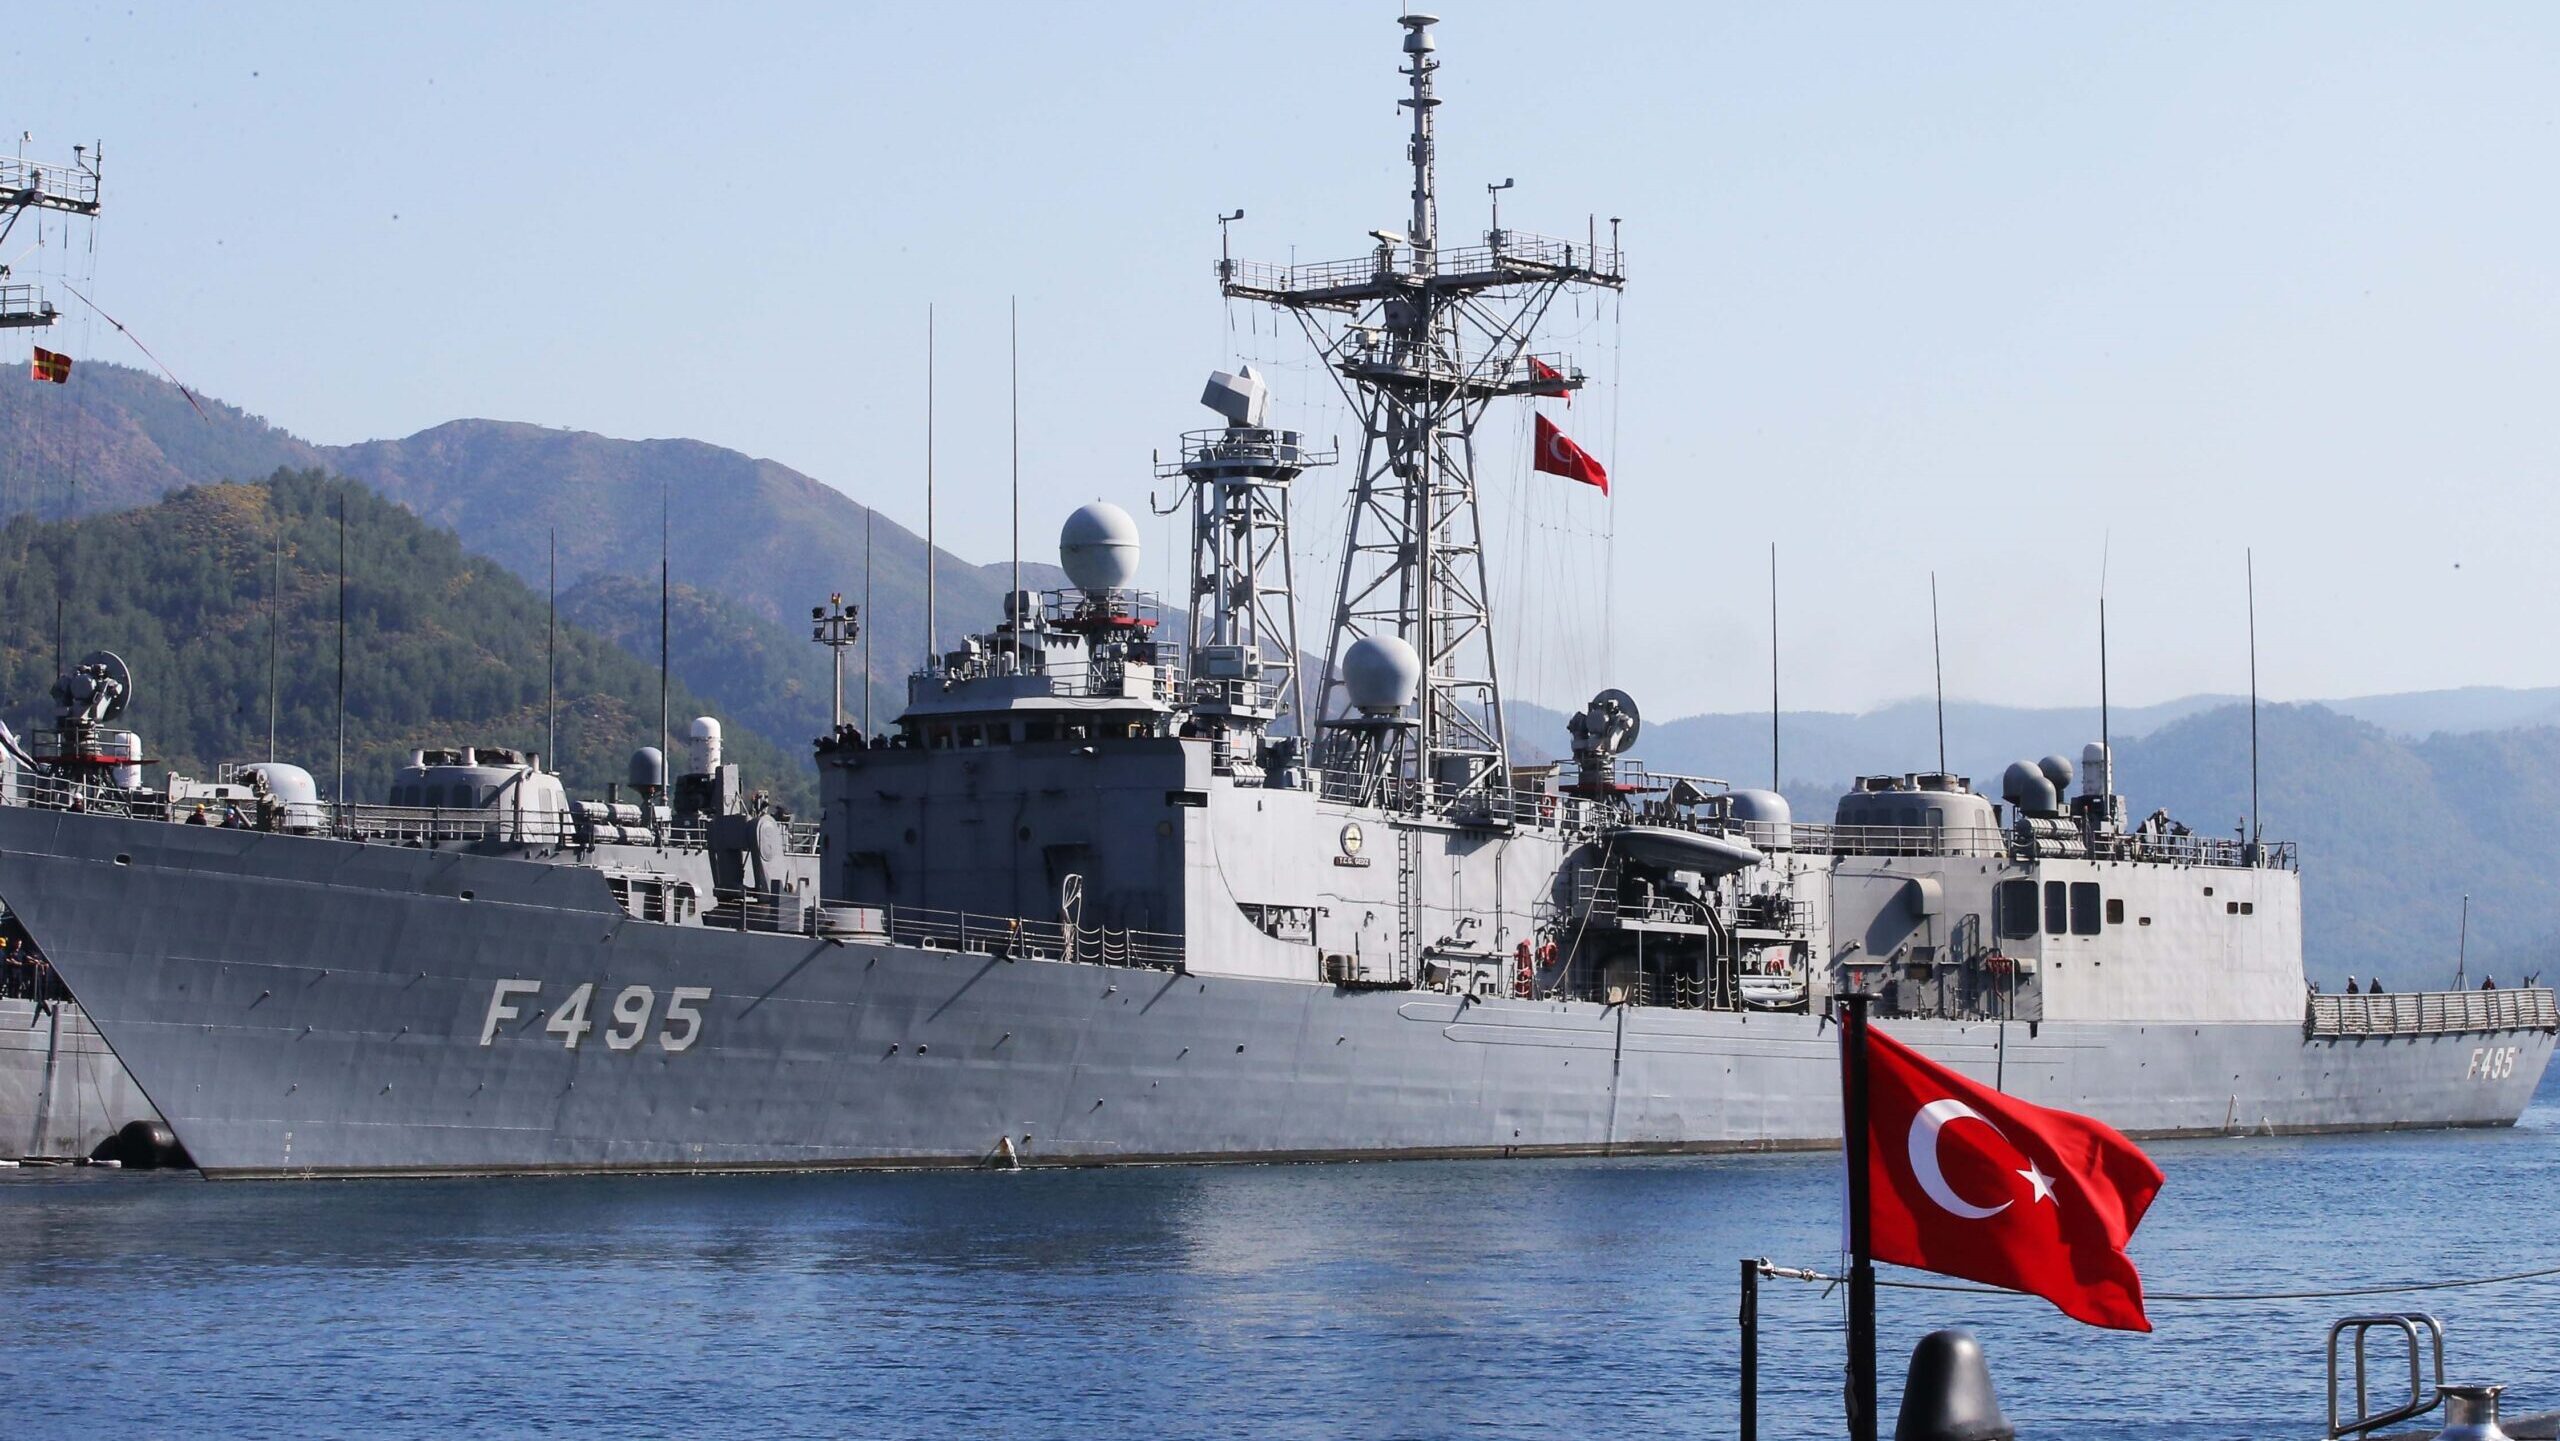 Turkey Strengthens NATO Ties With Participation in Large-Scale Neptune Strike Military Drills